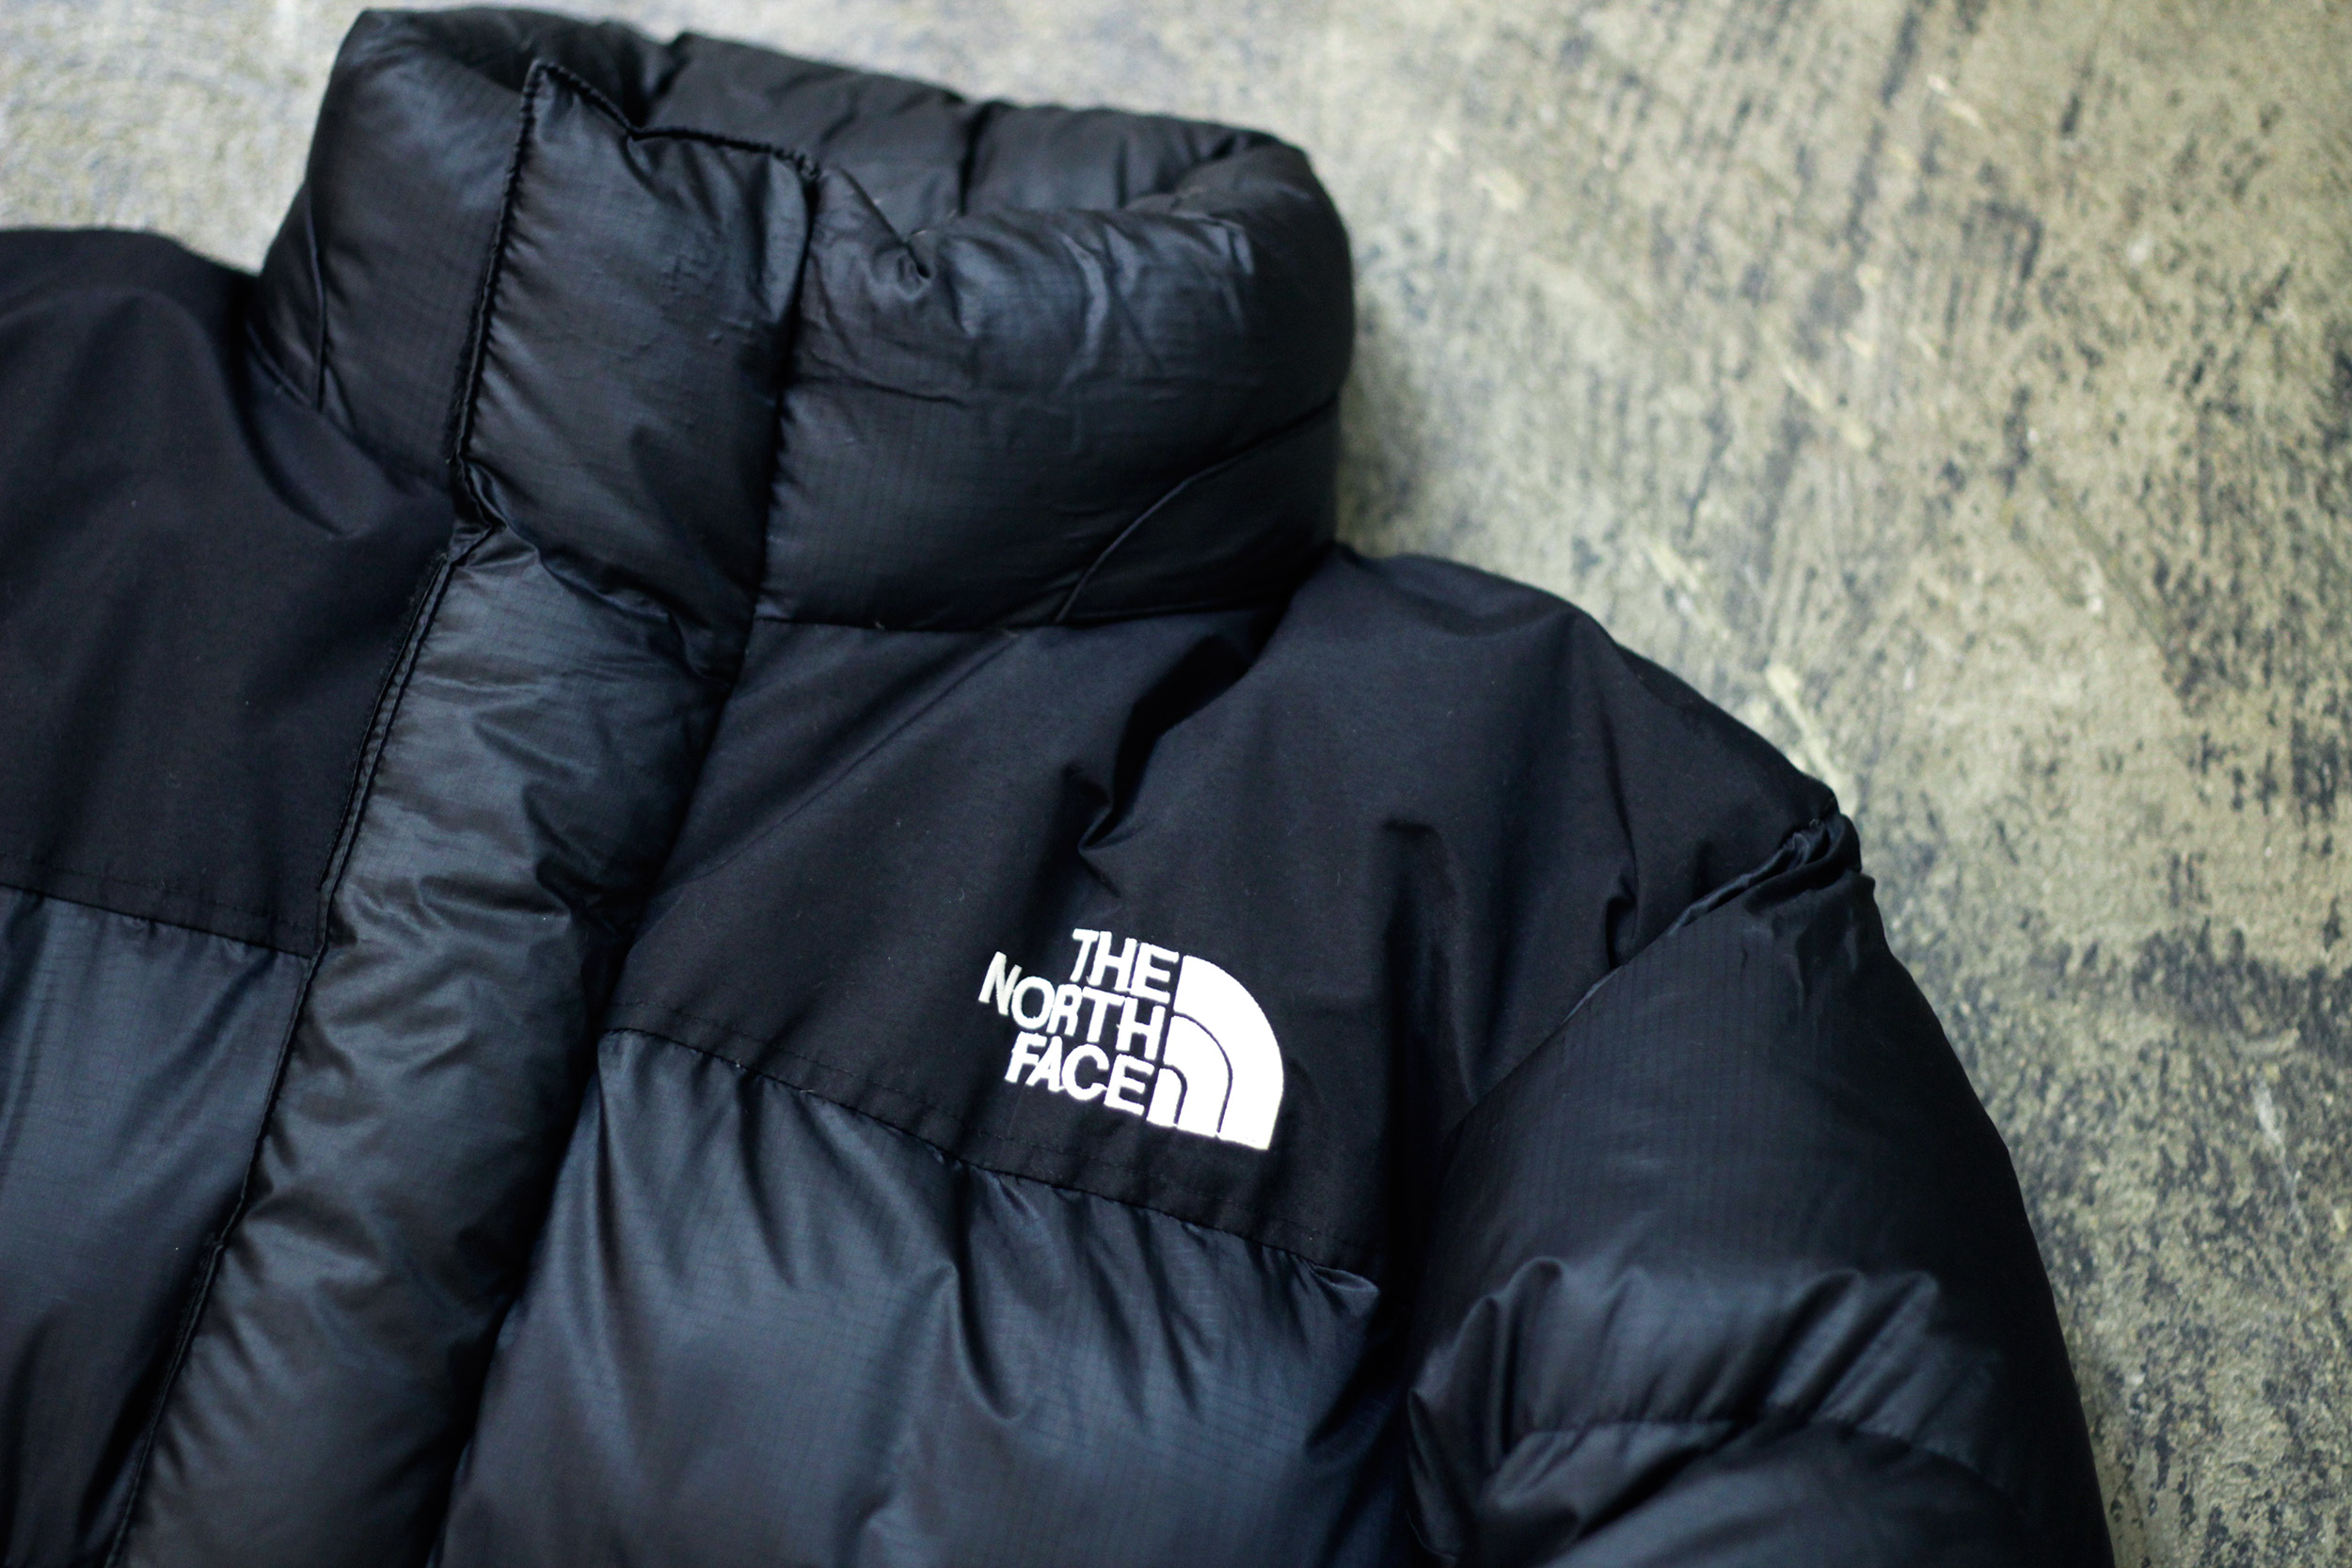 THE NORTH FACE / Vintage Baltro Down Jacket | NICE des Clothing